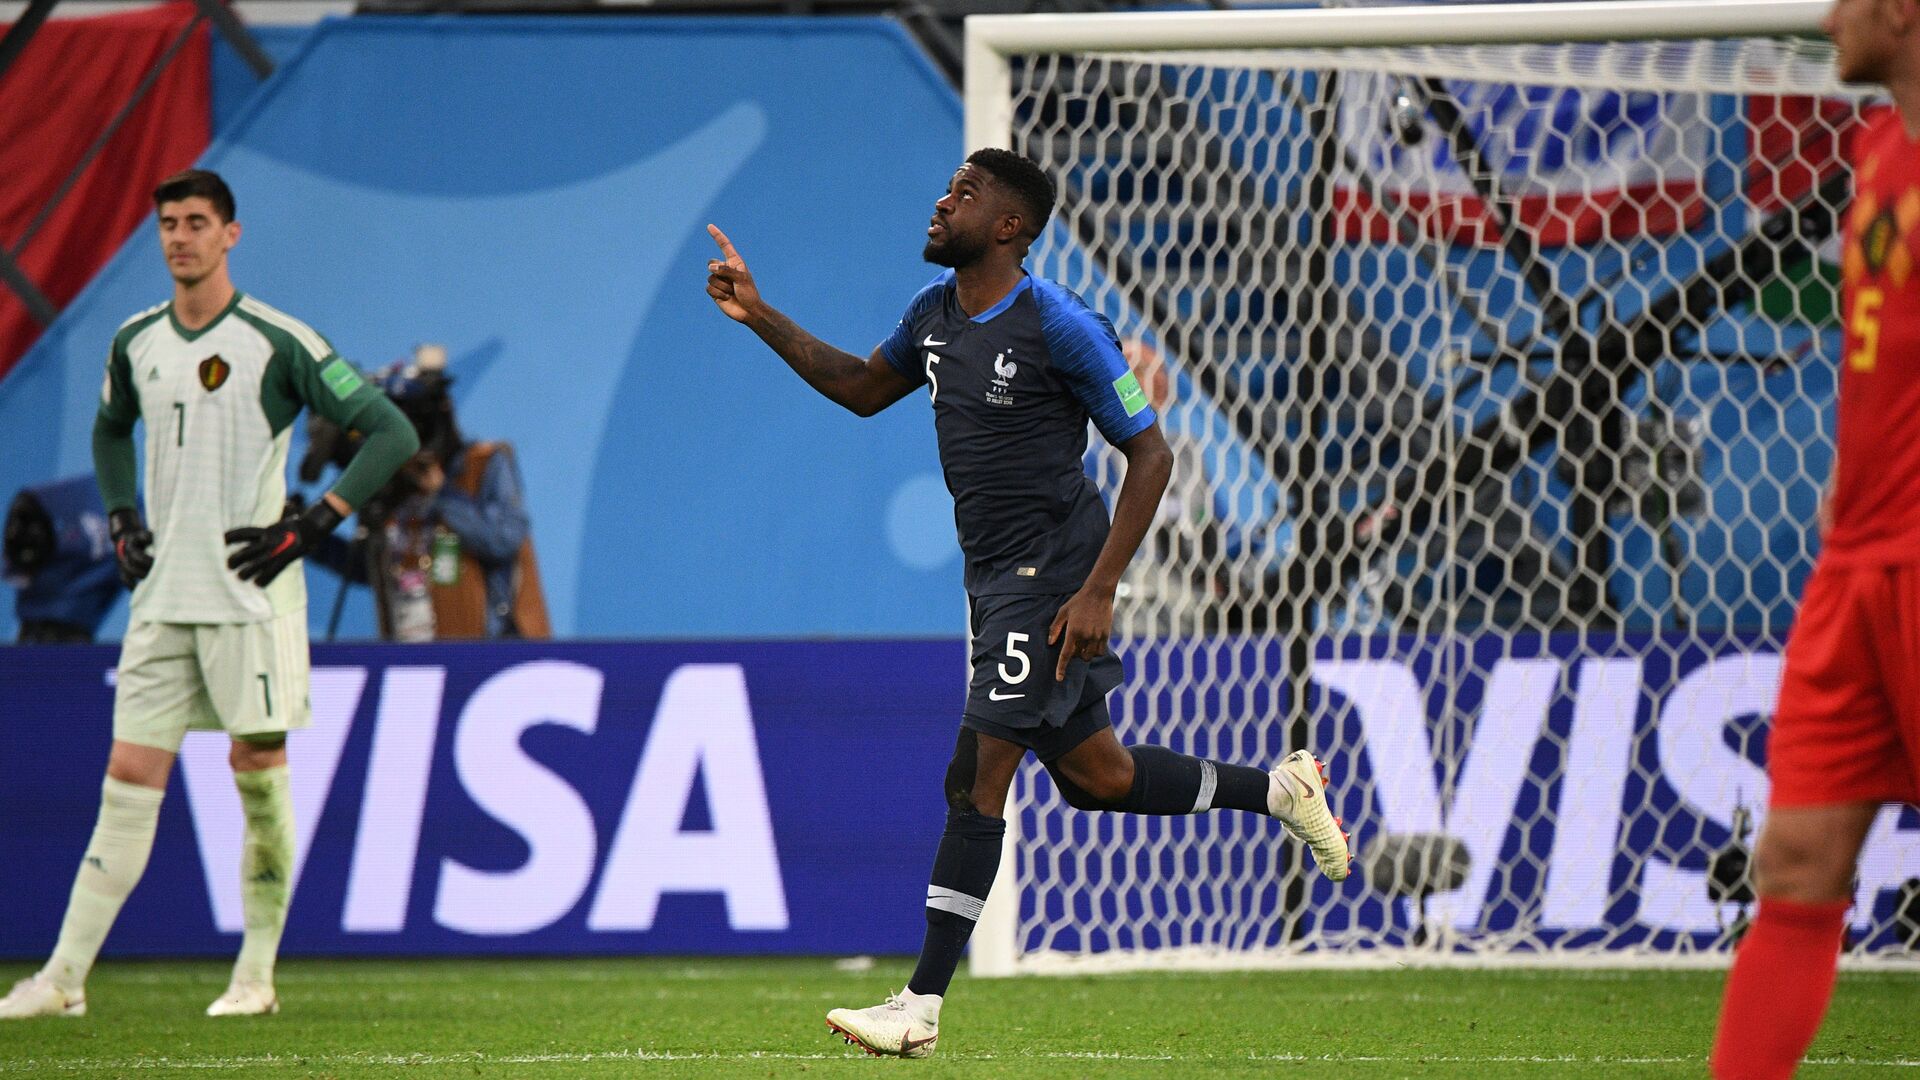 France's Umtiti after scoring goal in World Cup's semifinals match against Belgium on July 10, 2018. Saint Petersburg, Russia.  - اسپوتنیک افغانستان  , 1920, 17.01.2022